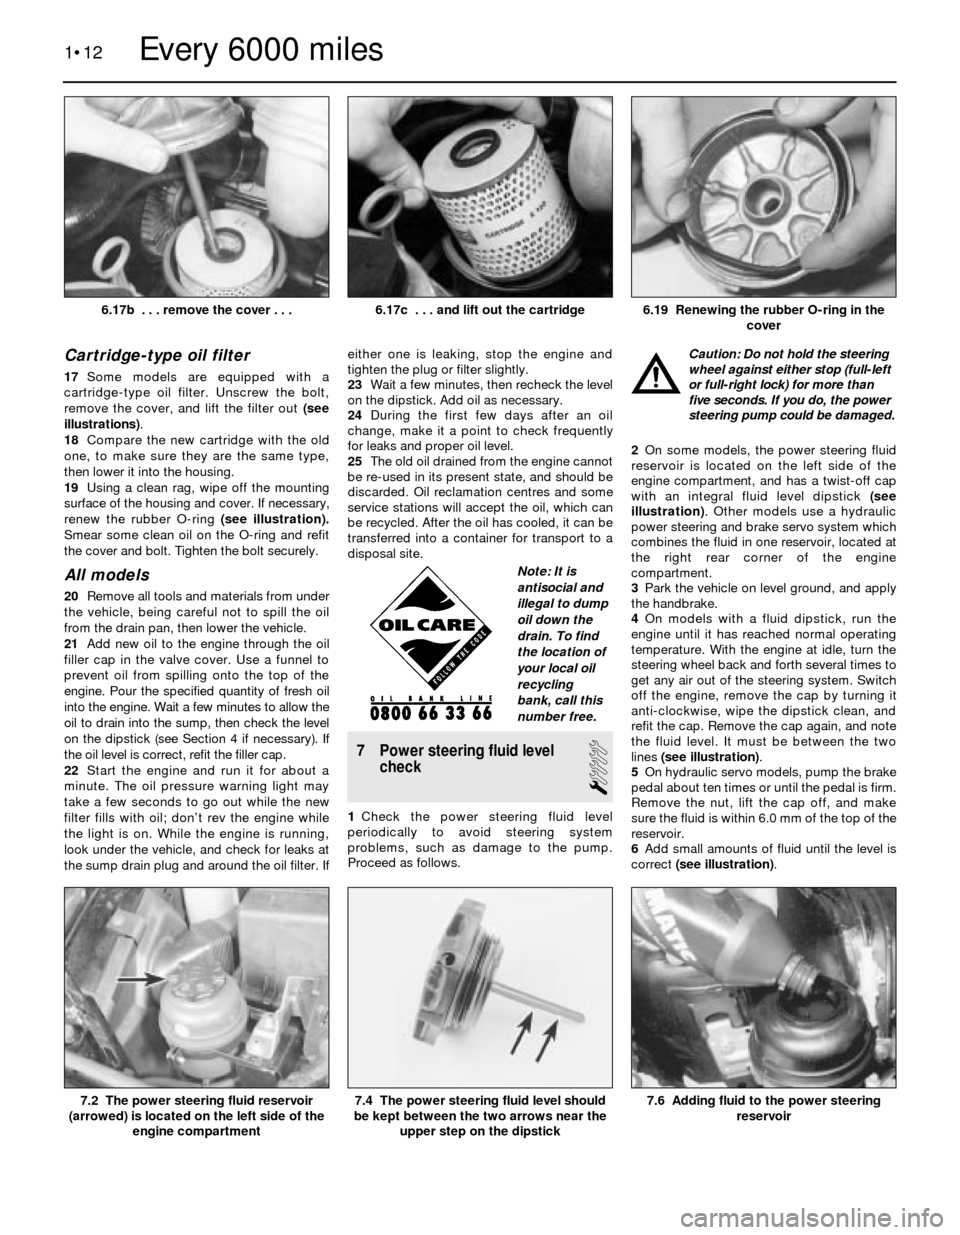 BMW 3 SERIES 1985 E30 Workshop Manual Cartridge-type oil filter
17Some models are equipped with a
cartridge-type oil filter. Unscrew the bolt,
remove the cover, and lift the filter out (see
illustrations).
18Compare the new cartridge with